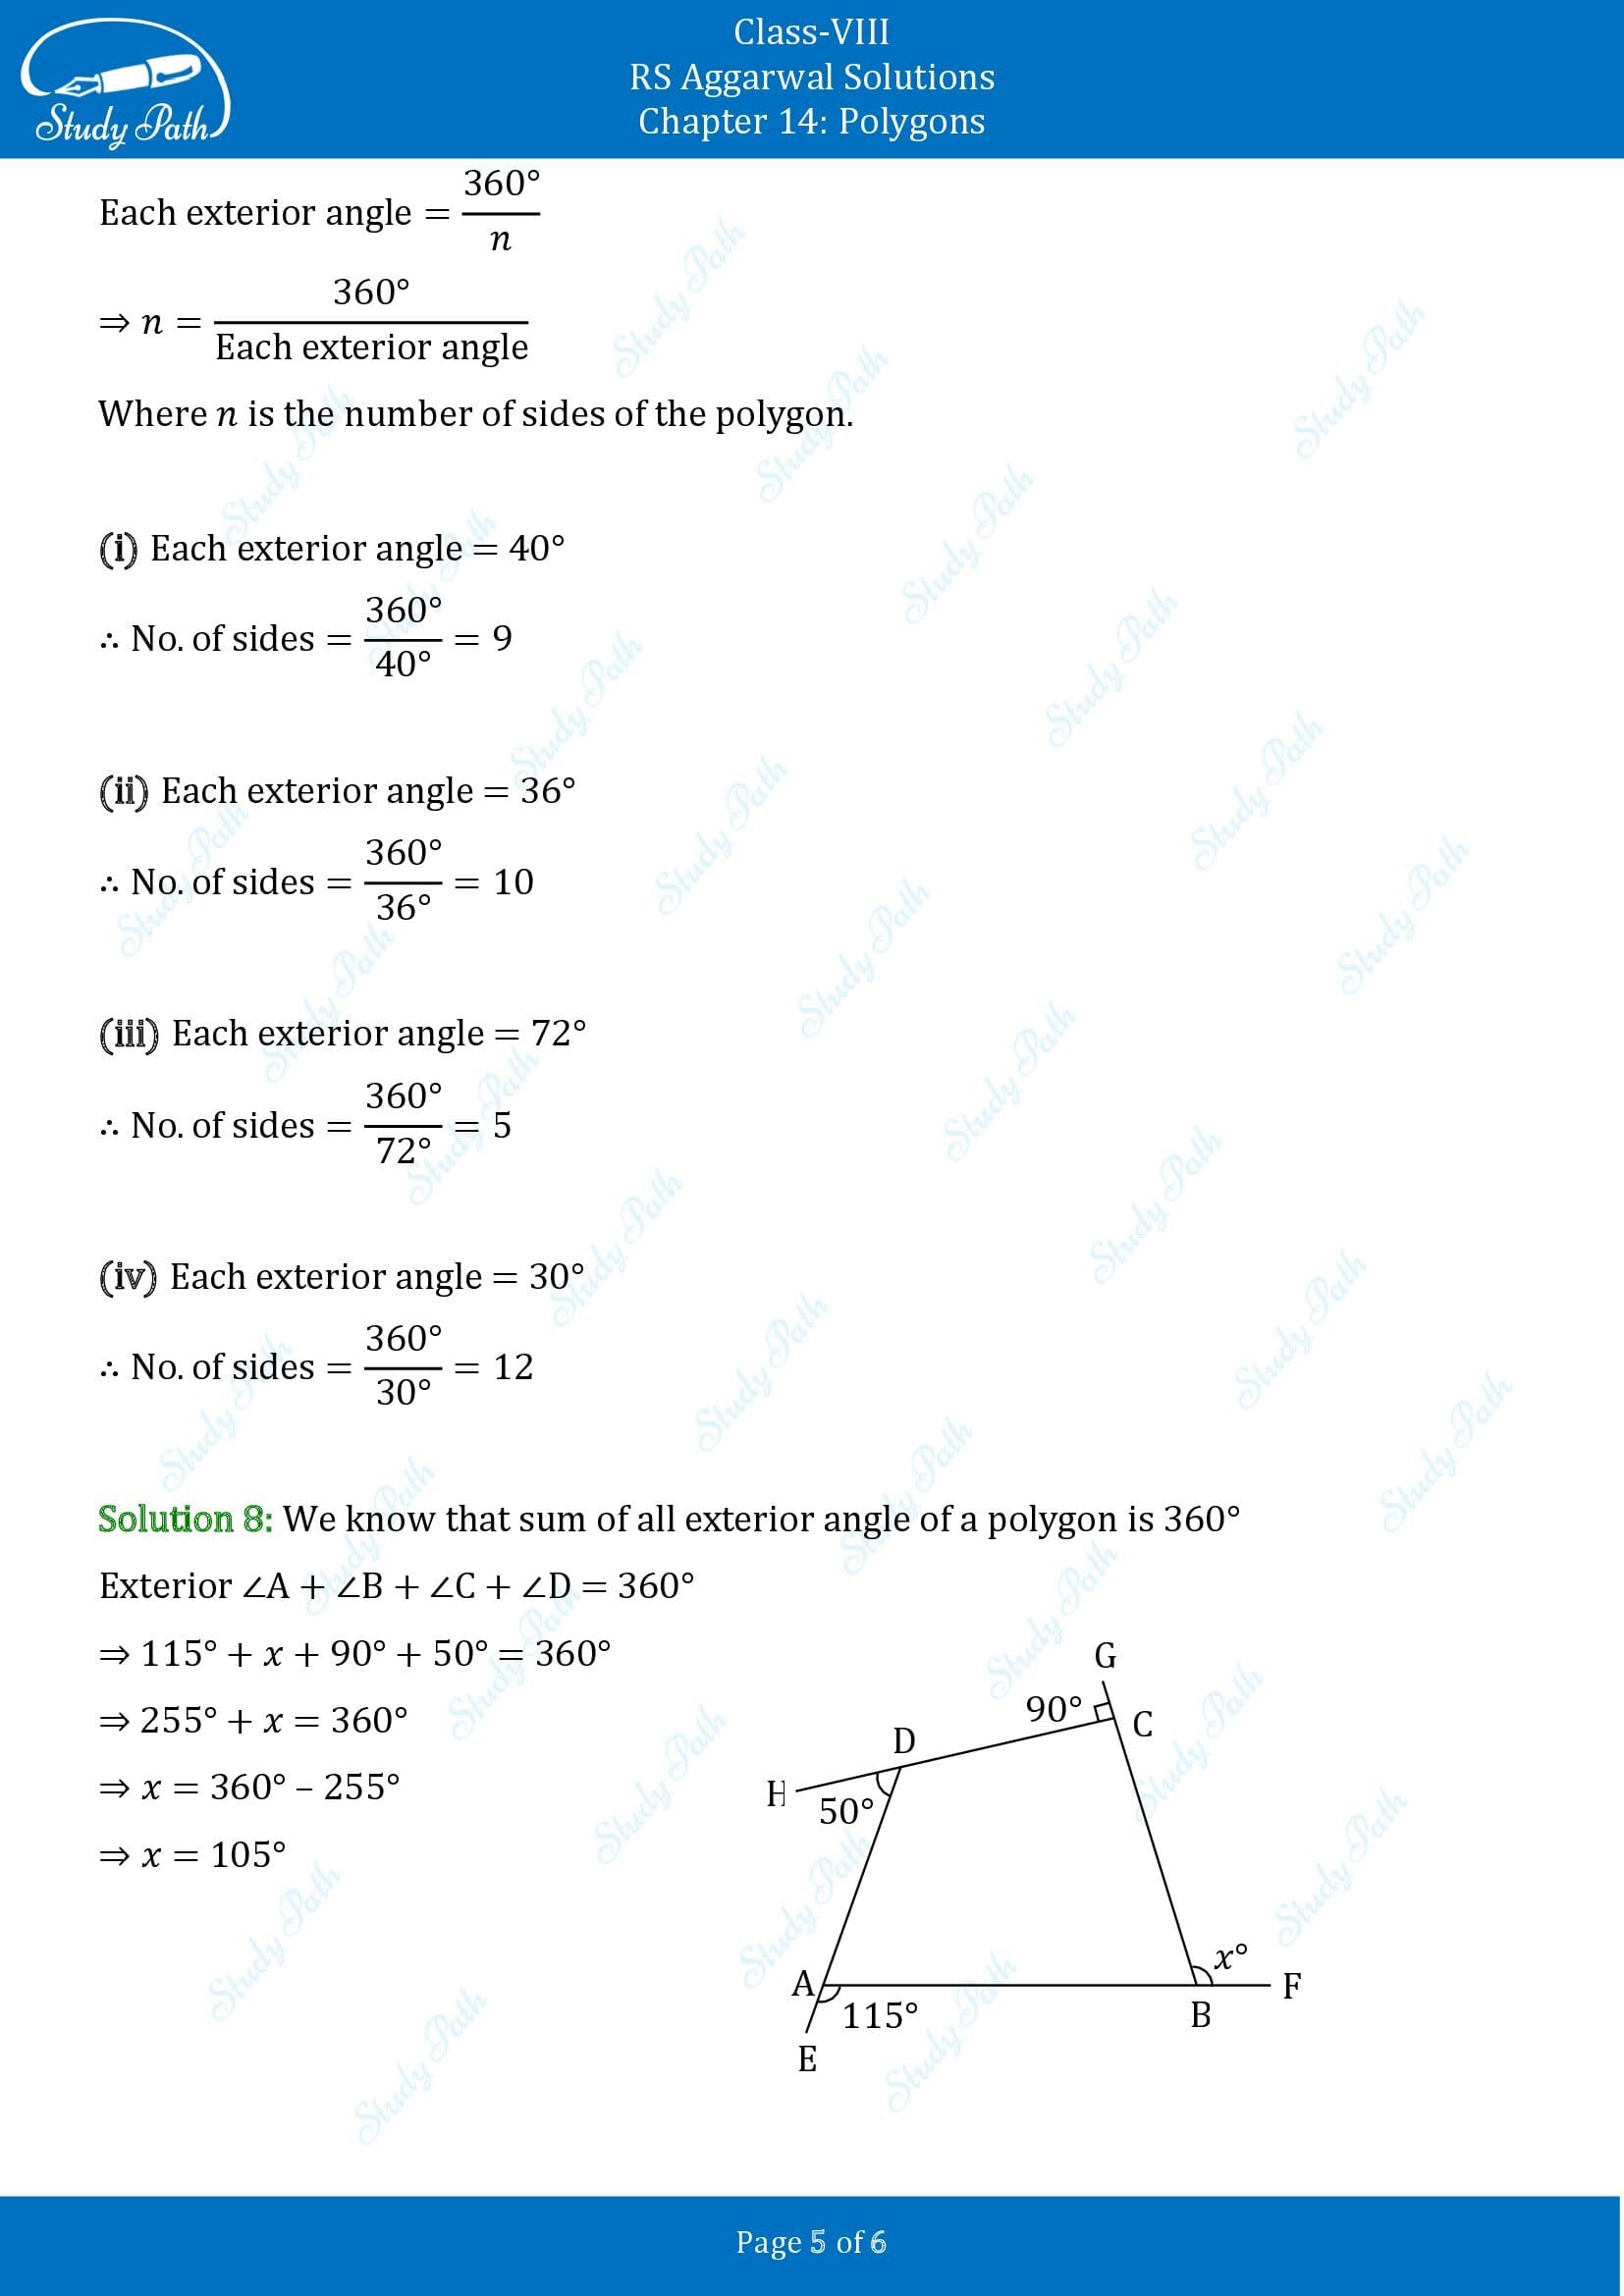 RS Aggarwal Solutions Class 8 Chapter 14 Polygons Exercise 14A 00005